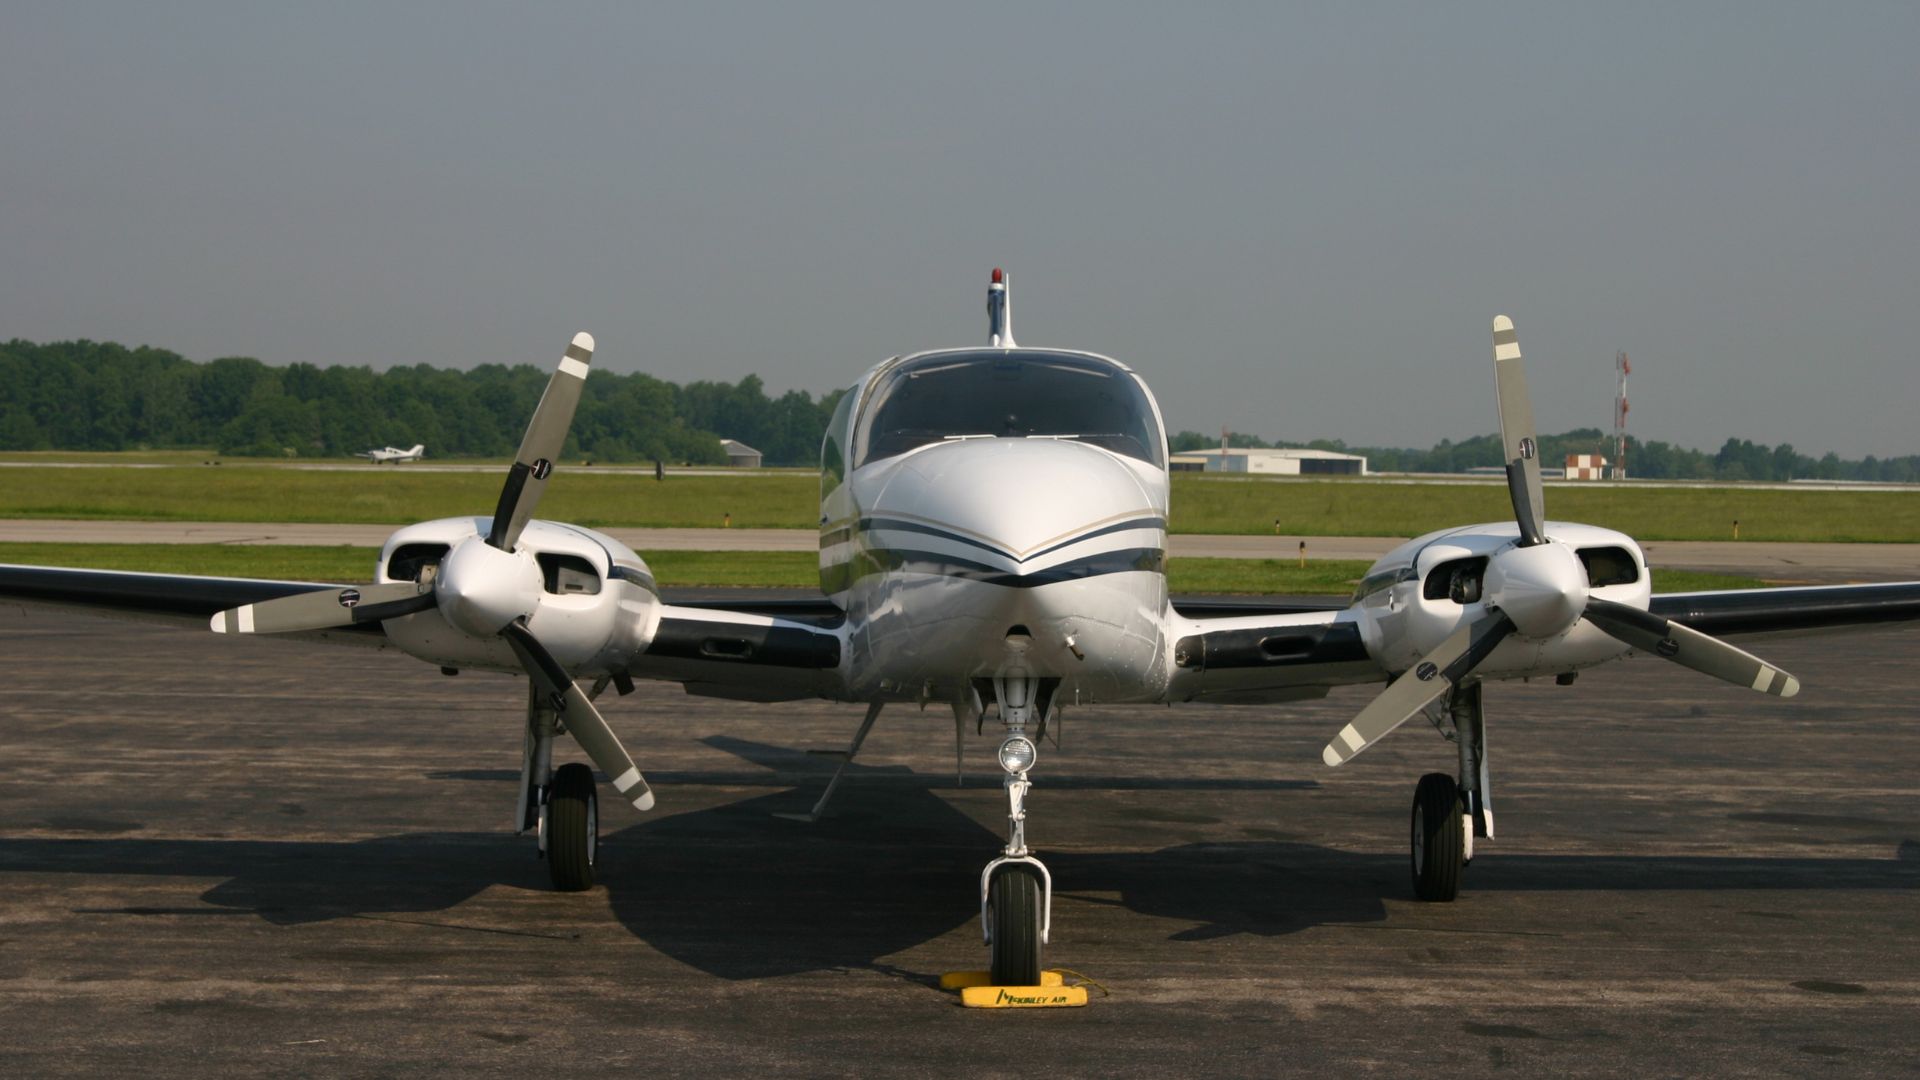 Cessna 310 Airplane Parked